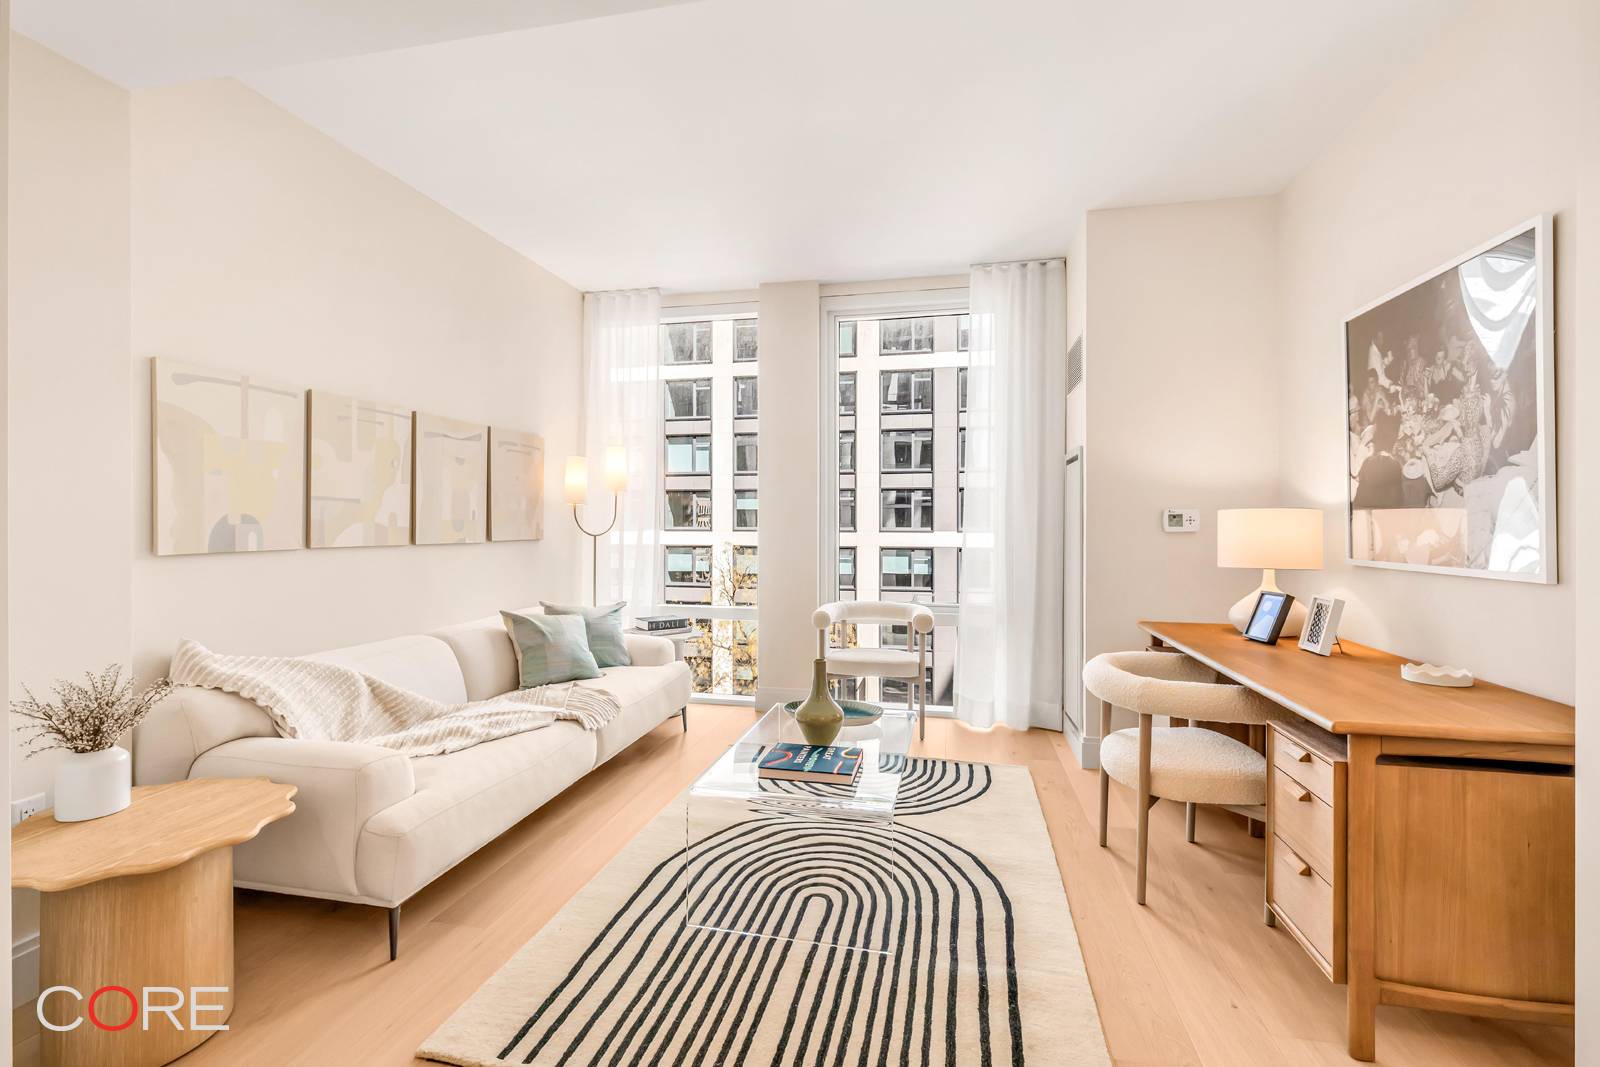 Private In Person amp ; Virtual Appointments Available Immediate Occupancy This generously proportioned 605 square foot studio boasts a thoughtfully designed layout that elevates studio living to new heights.